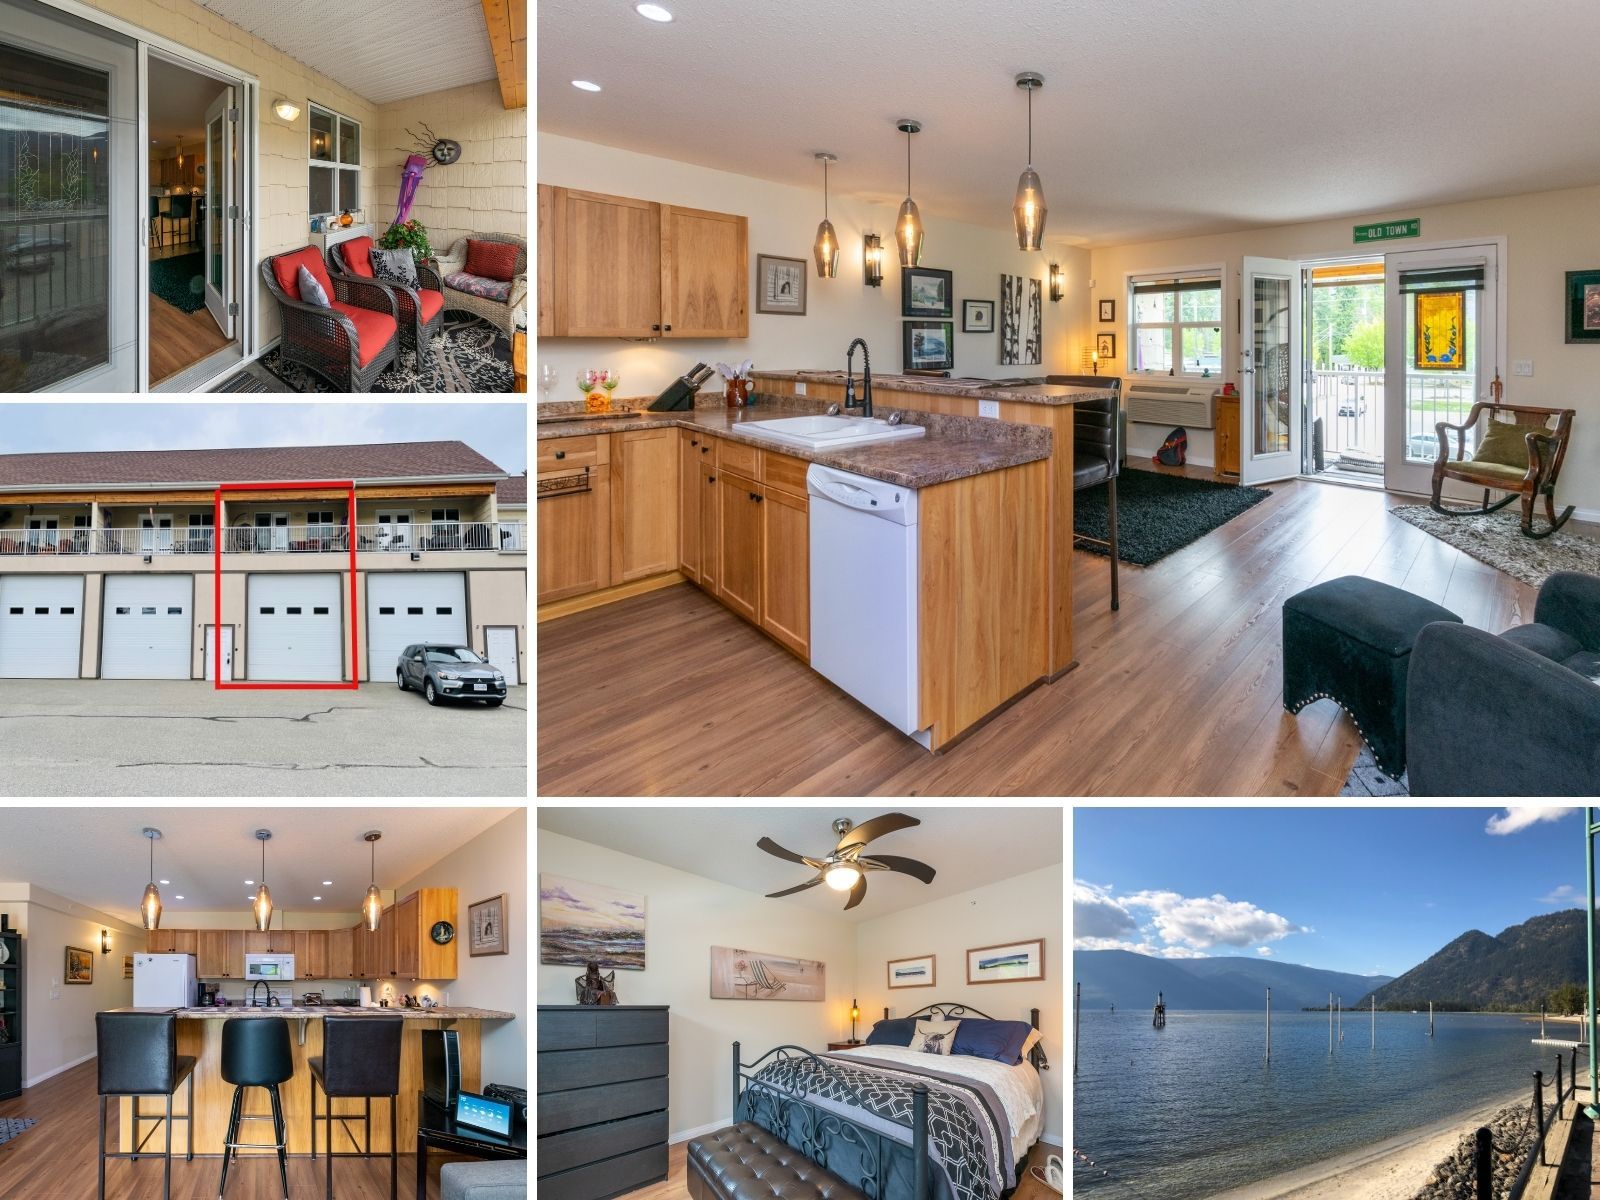 Main Photo: 3 1205 Riverside Avenue in Sicamous: Multi-family for sale : MLS®# 10253138